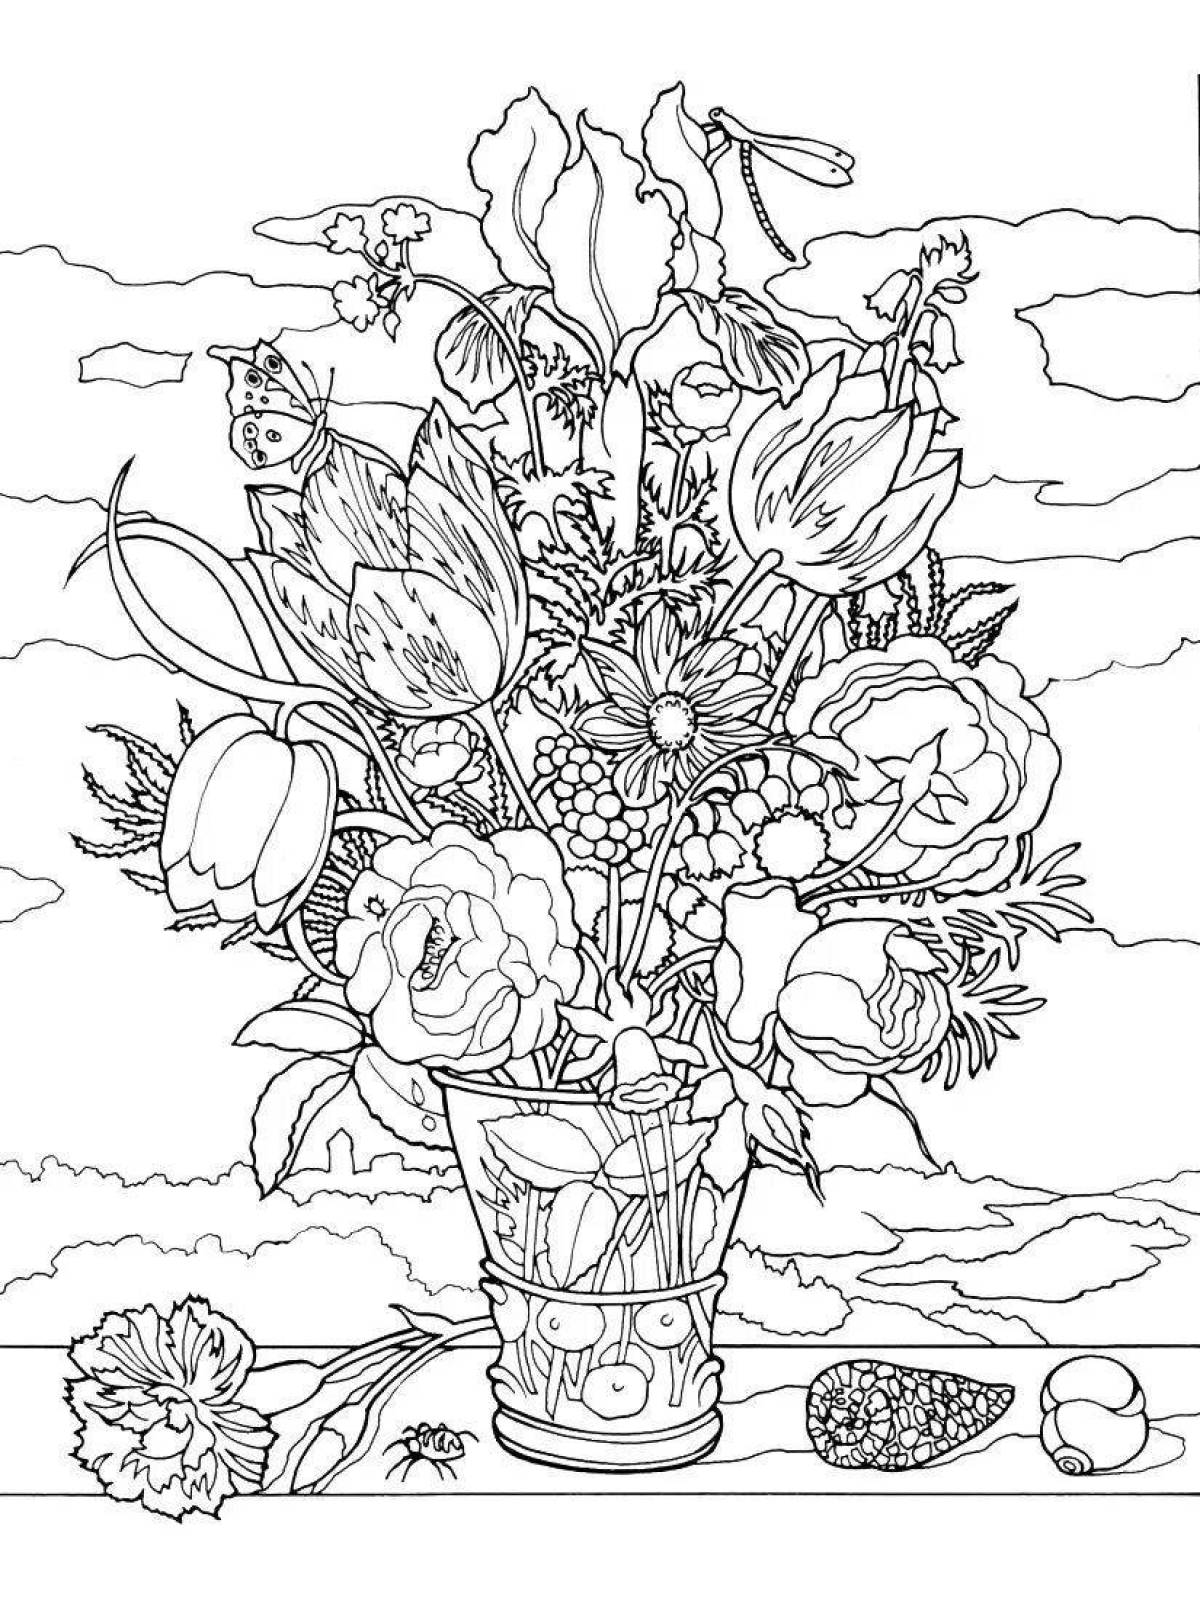 Online shop sweet coloring page